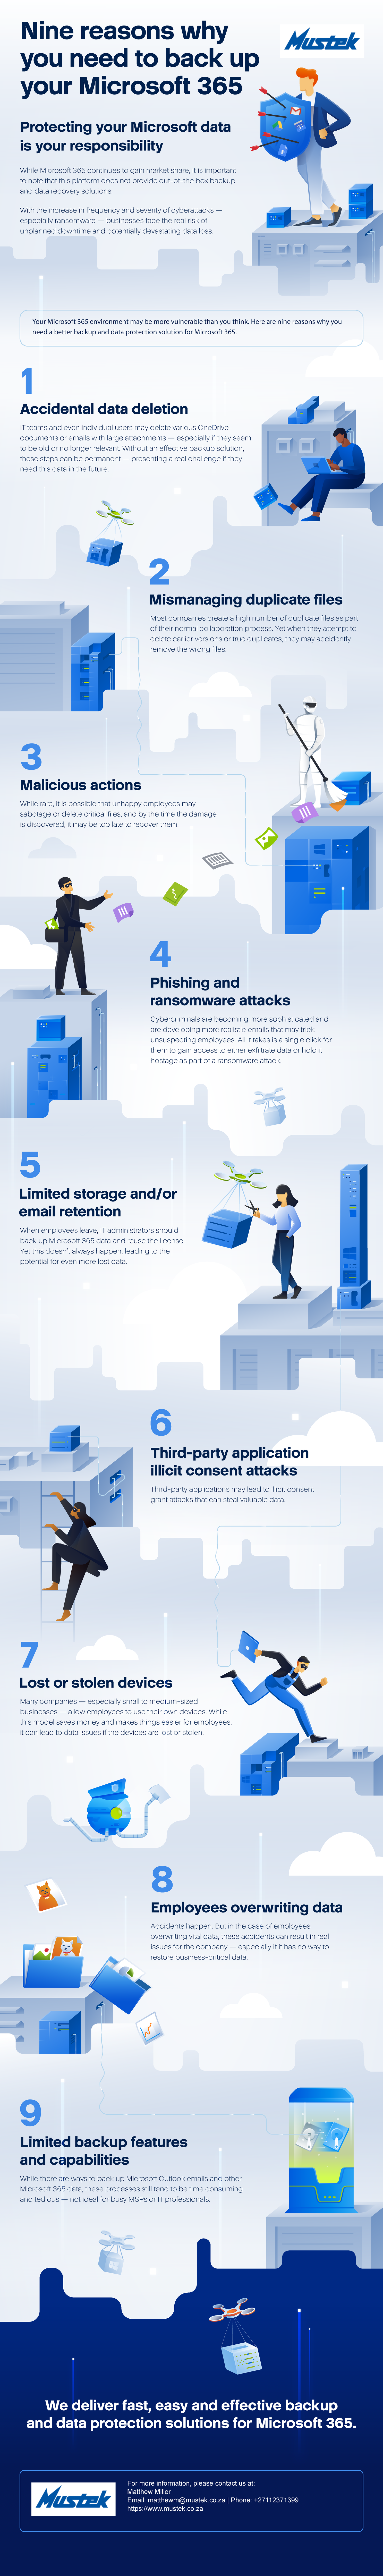 Nine reasons why you need to back up your Microsoft 365 – infographic